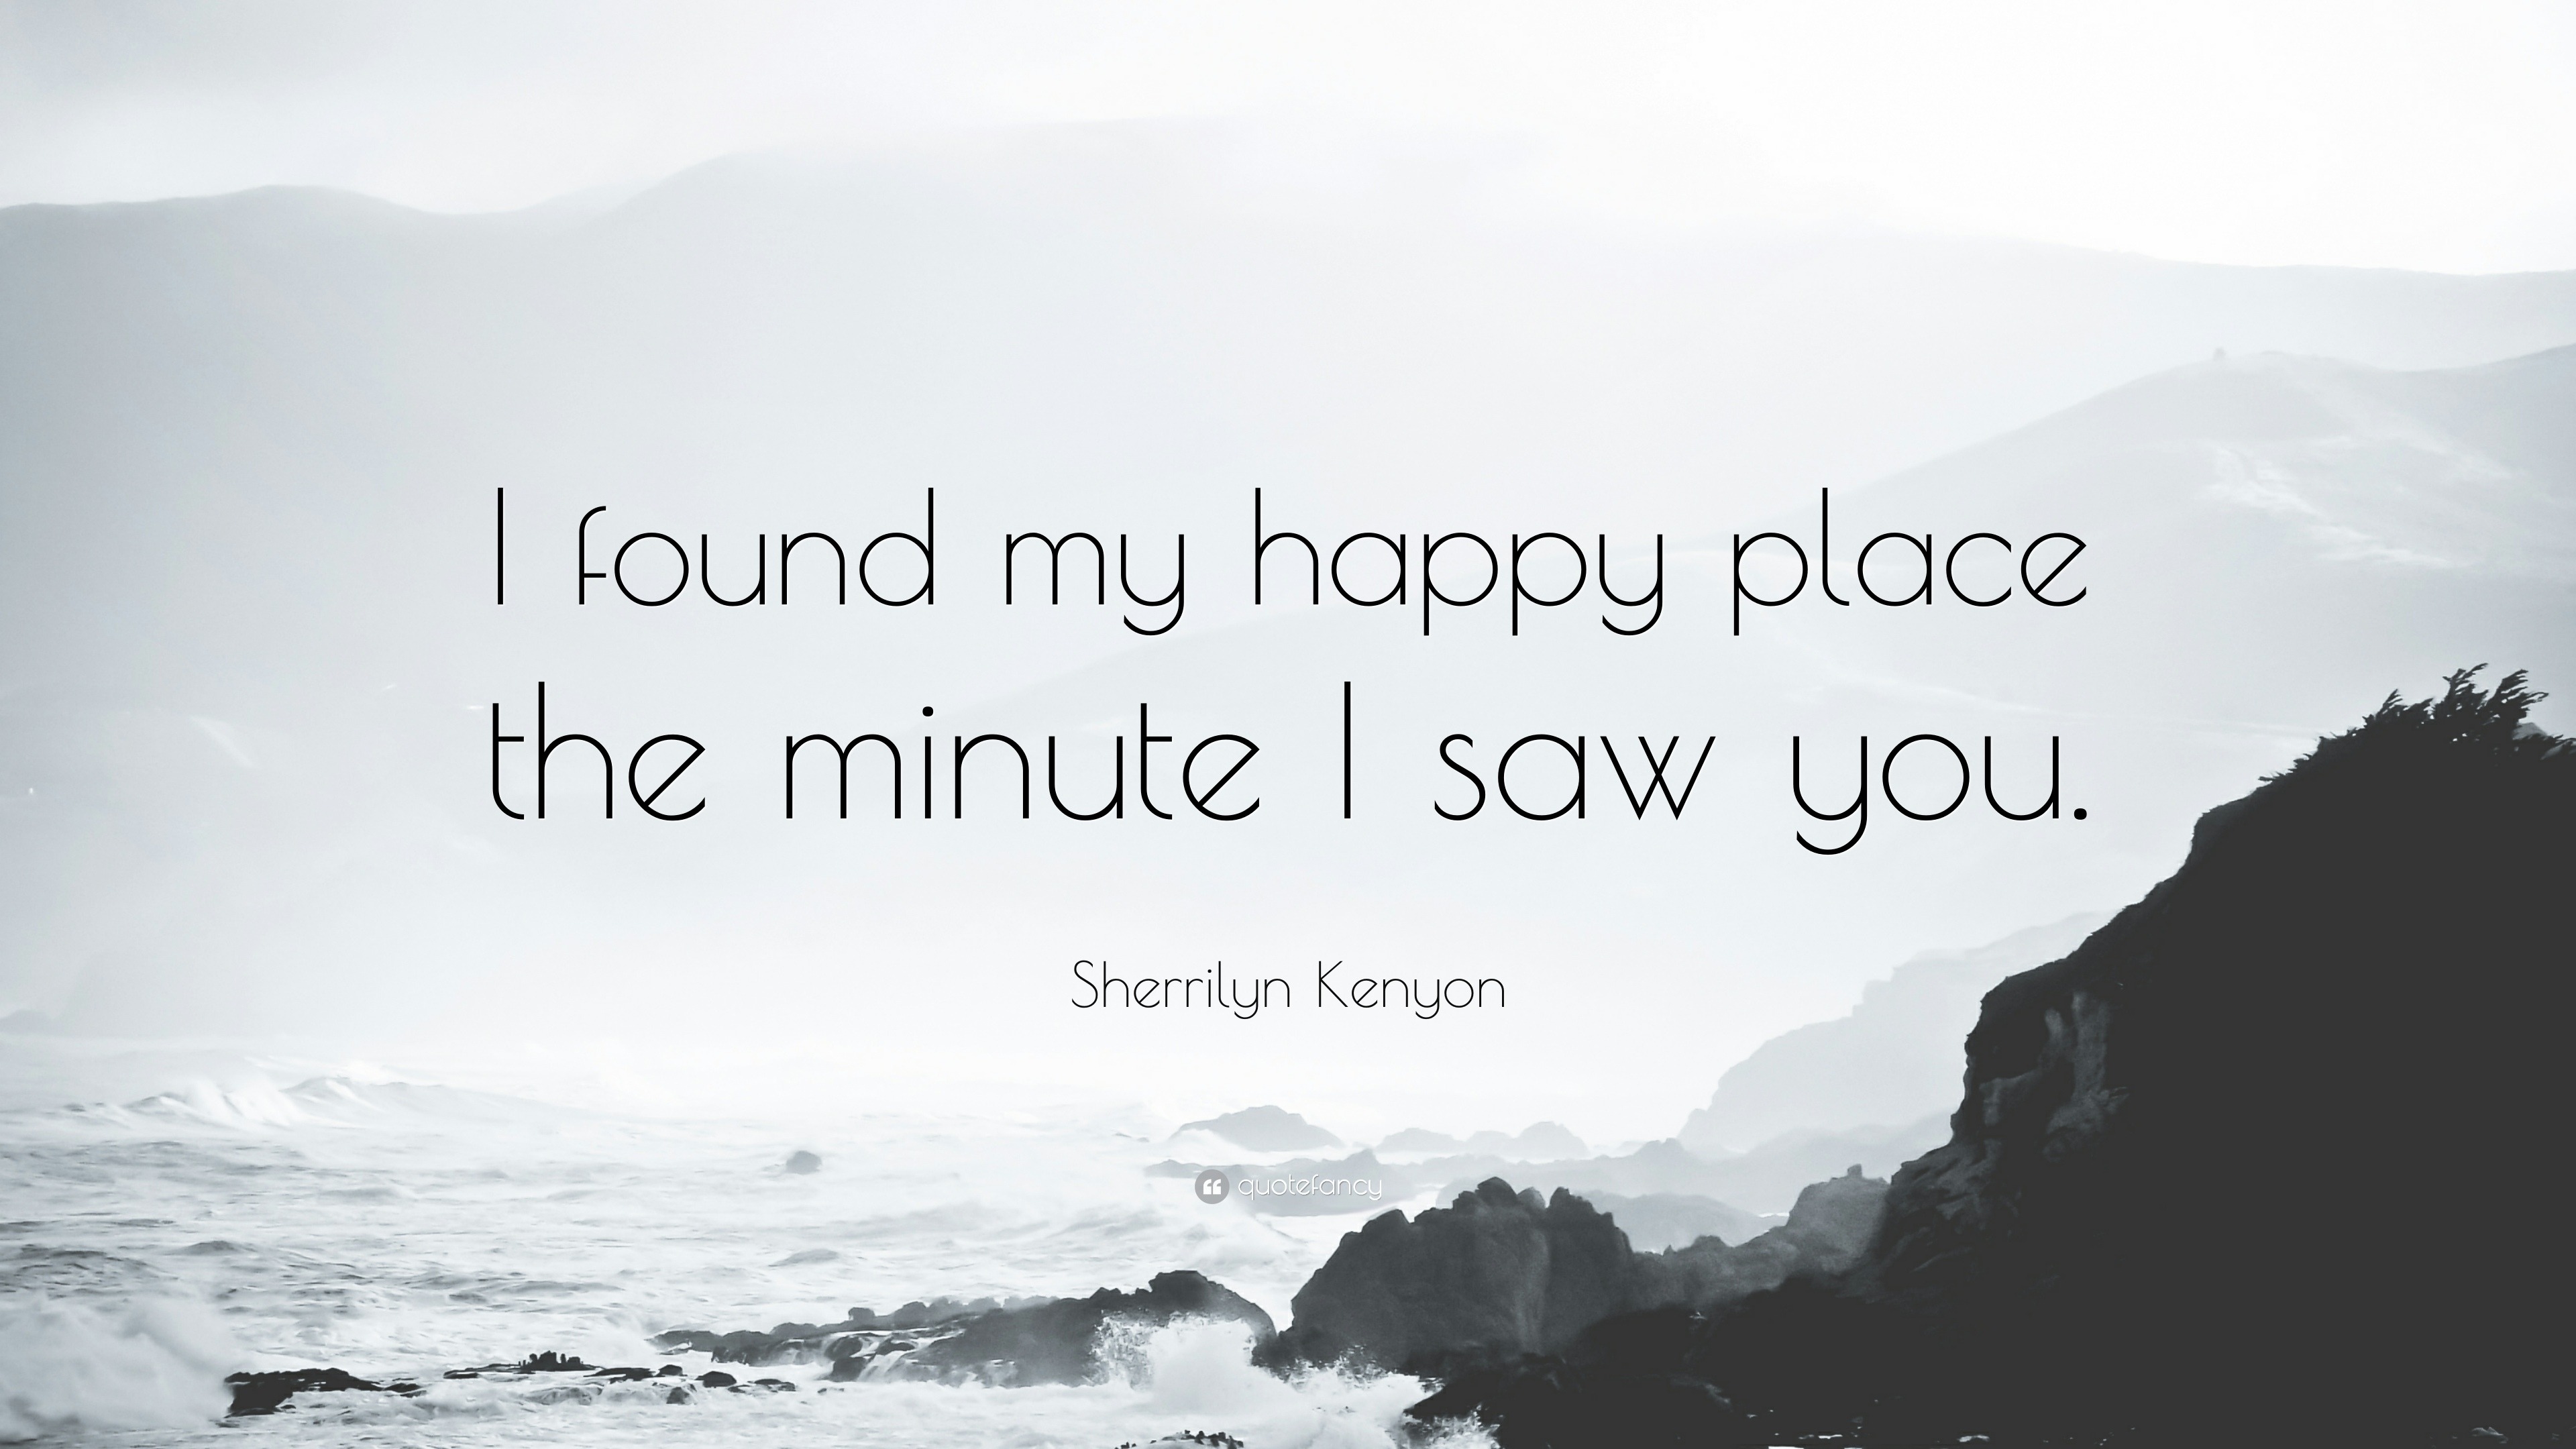 Sherrilyn Kenyon Quote: "I found my happy place the minute I saw you ...